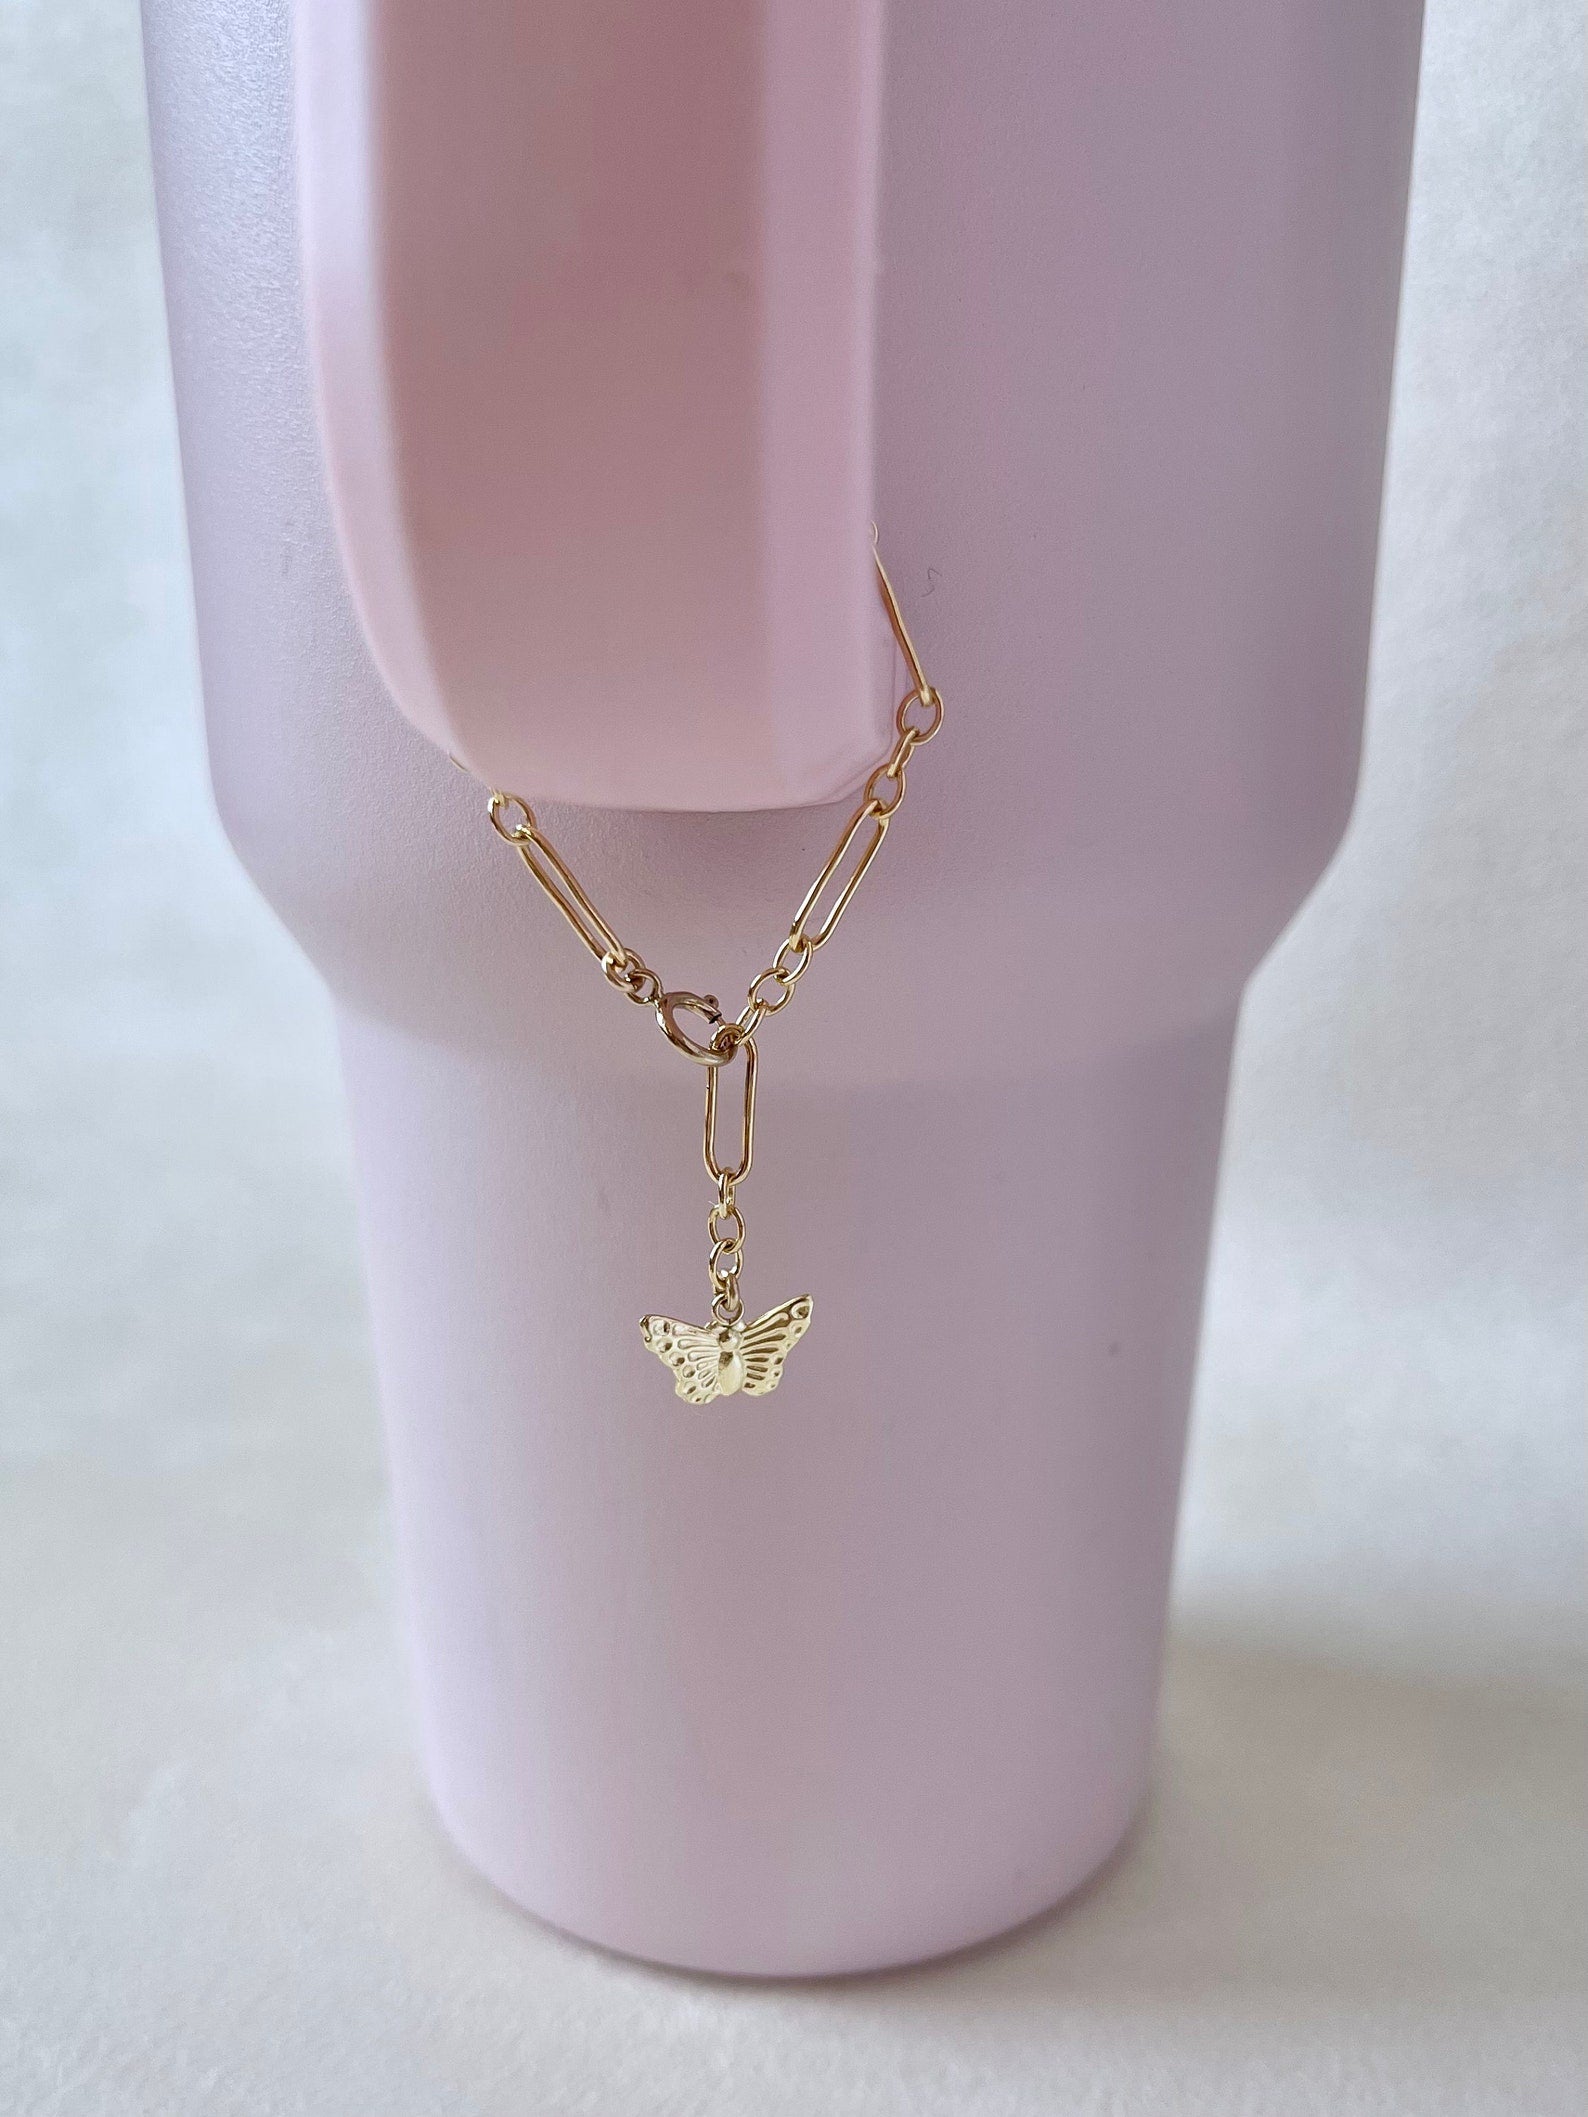 Butterfly Stanley Cup Charm – Sugar Fairy Jewelry